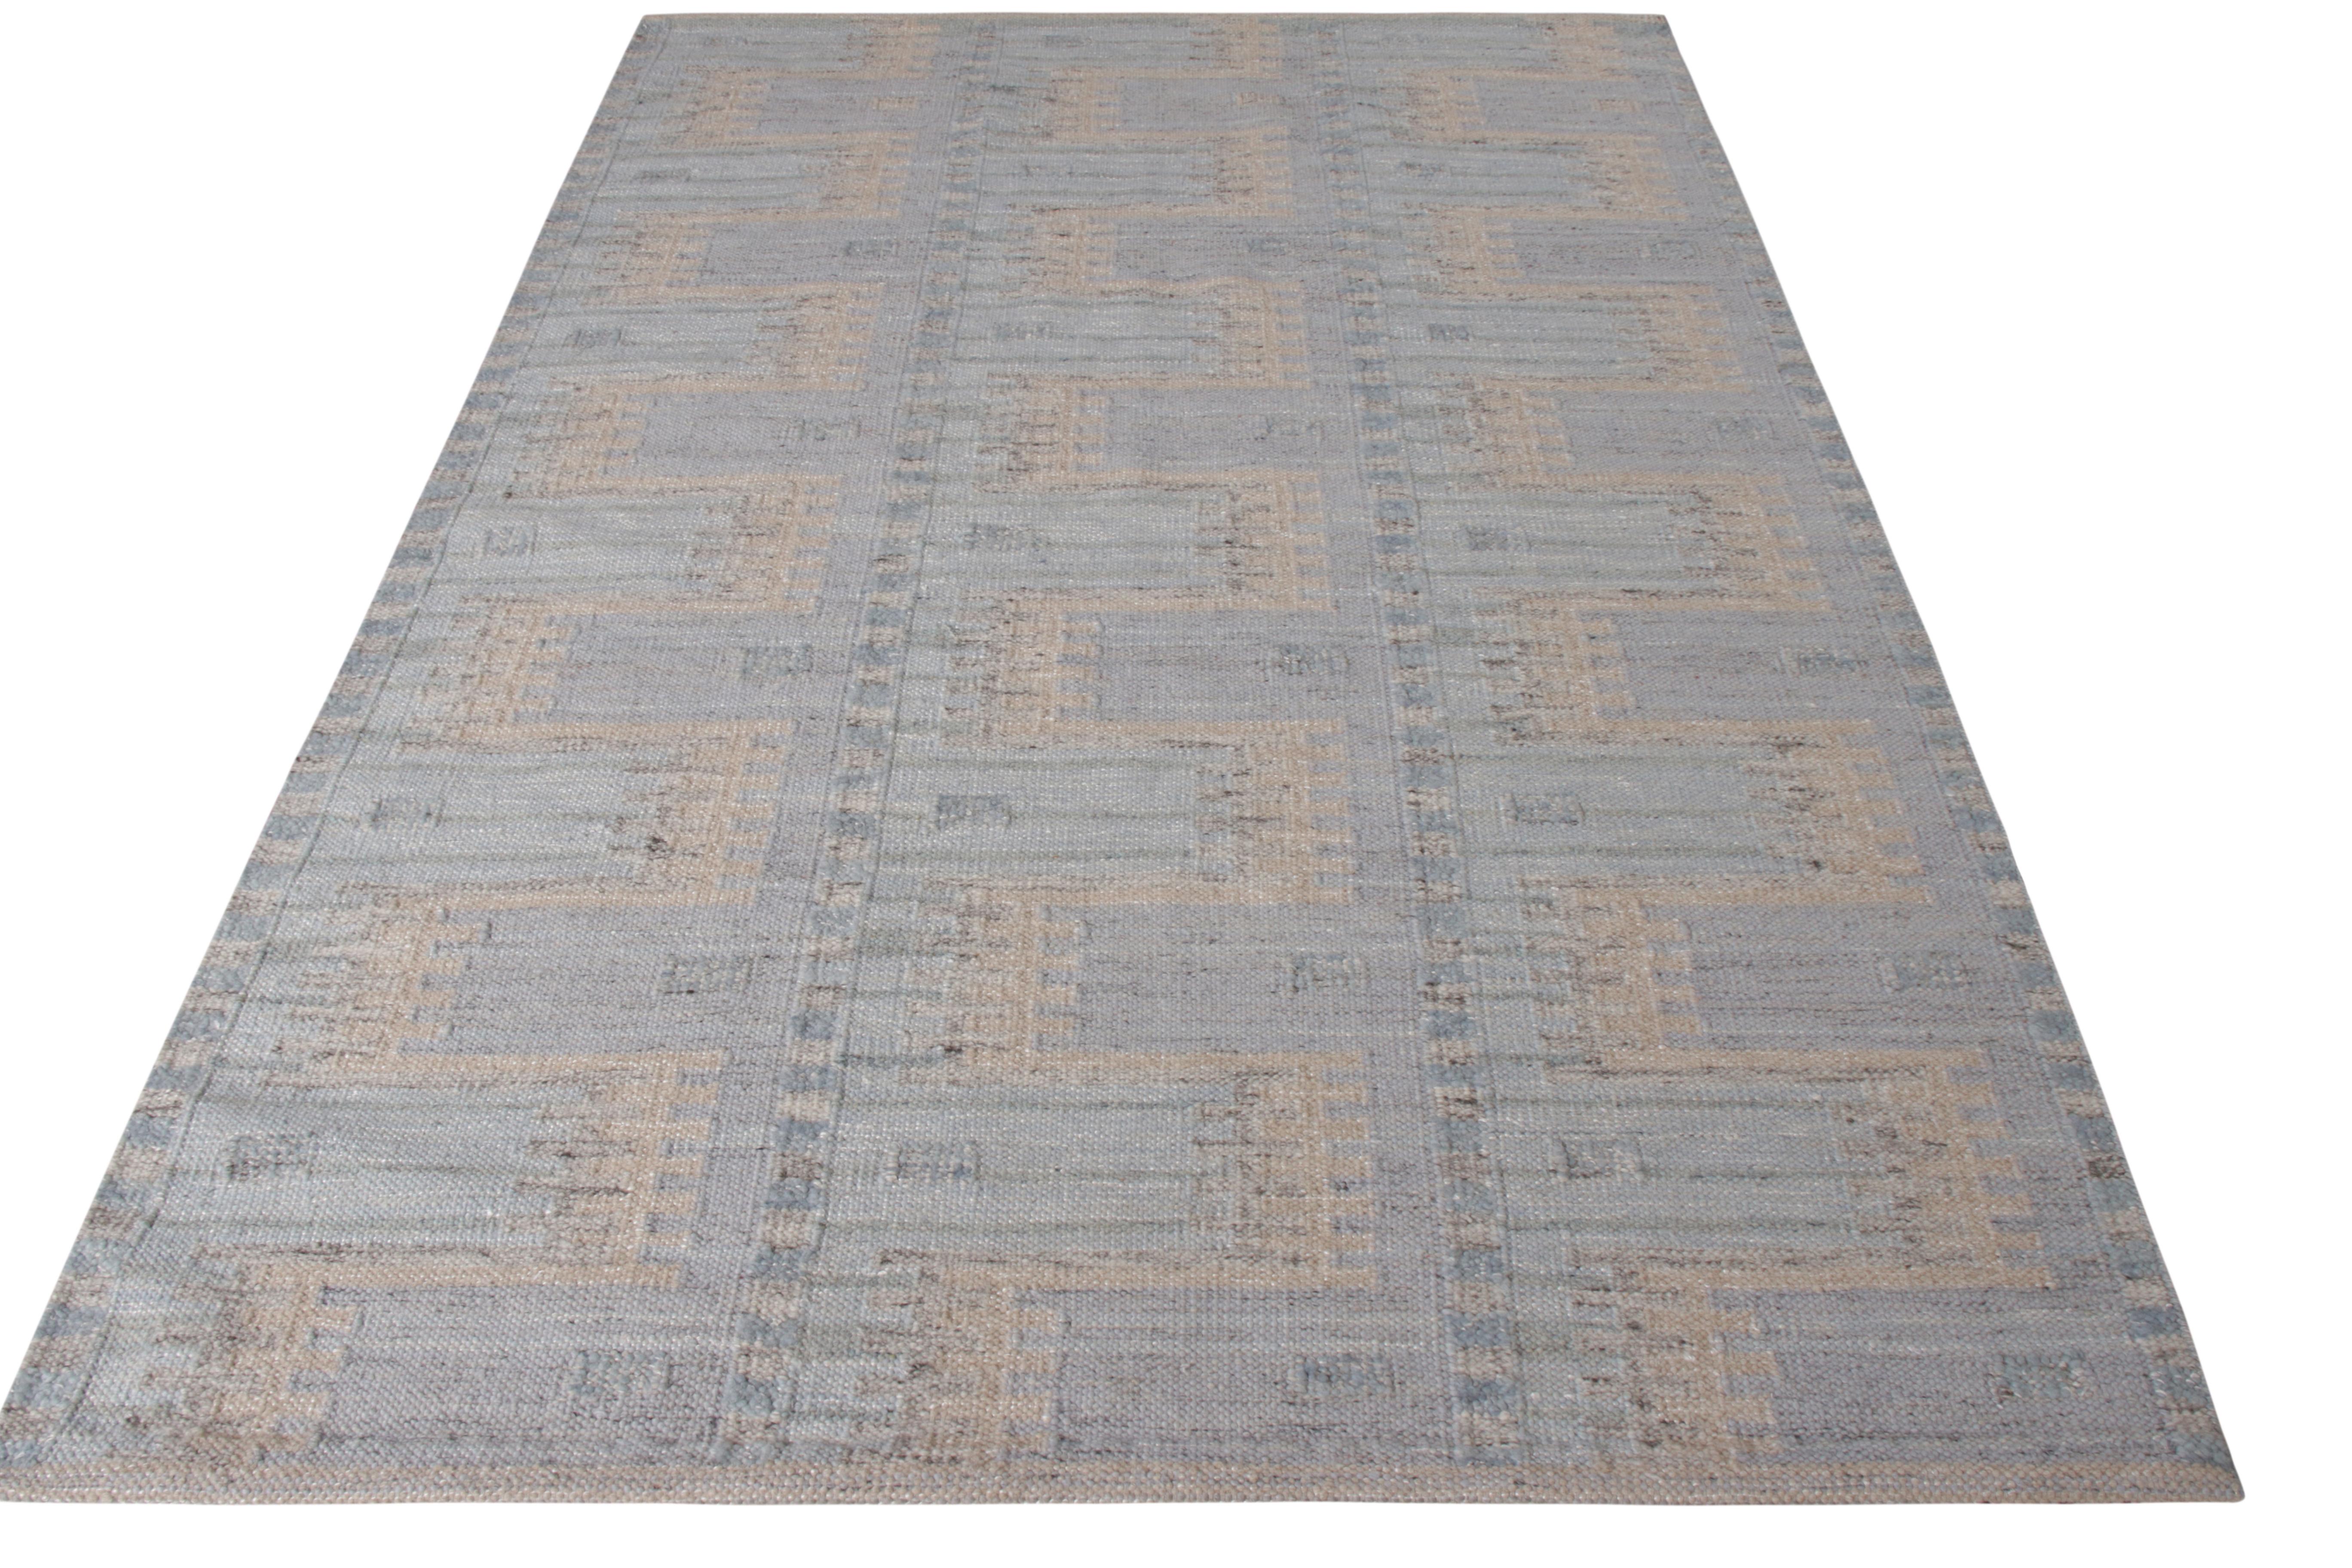 A 6x9 Kilim rug from the acclaimed Scandinavian Collection by Rug & Kilim. Handspun with a unique variety of yarns, lending the inviting texture and subtle color diversity that brings the f blue and off-white geometry movement and distinction.